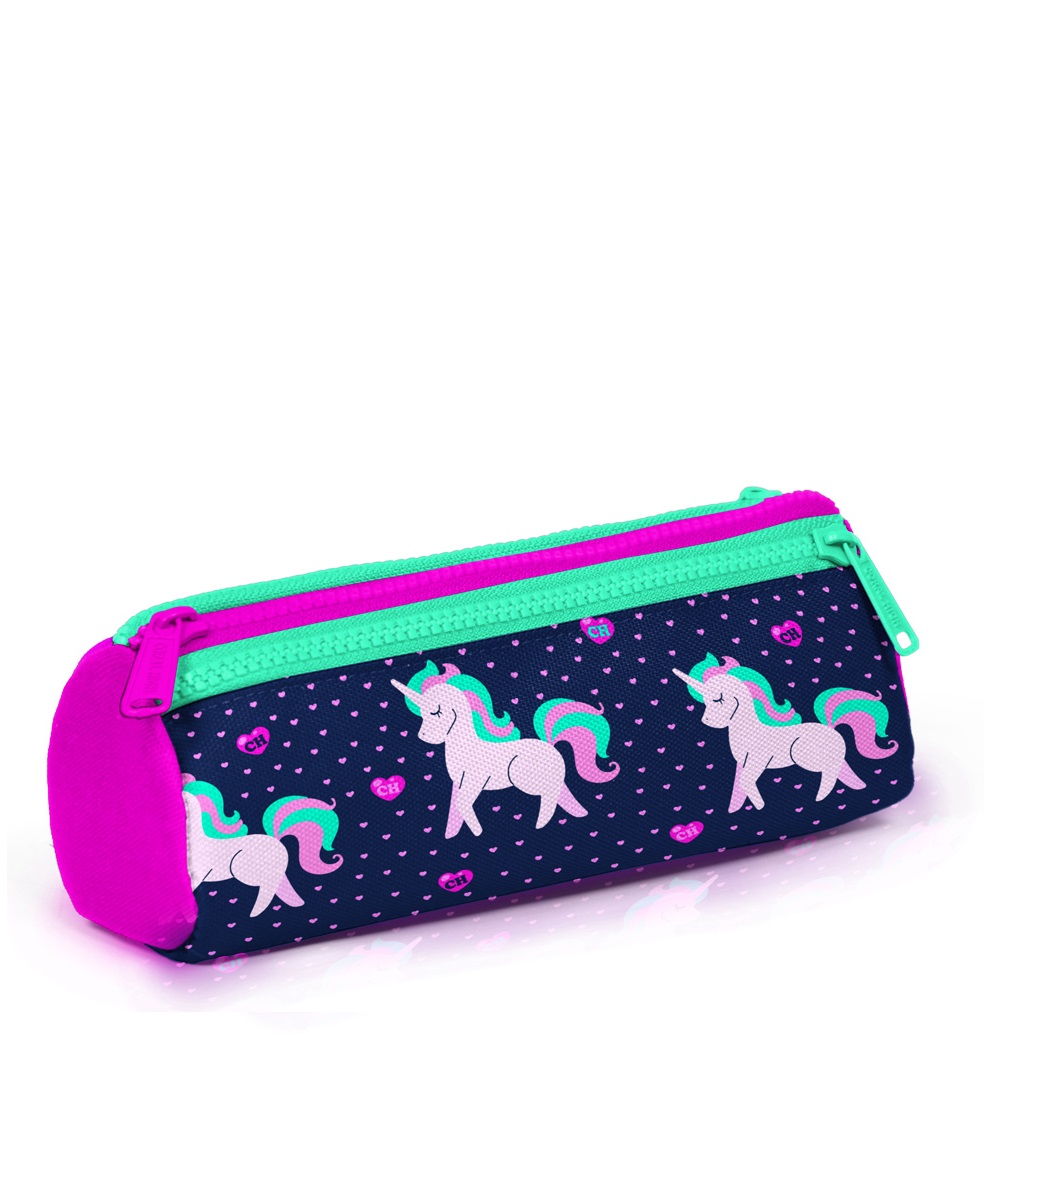 Coral High Kids Three Compartment Pencil case - Navy Pink Unicorn Patterned